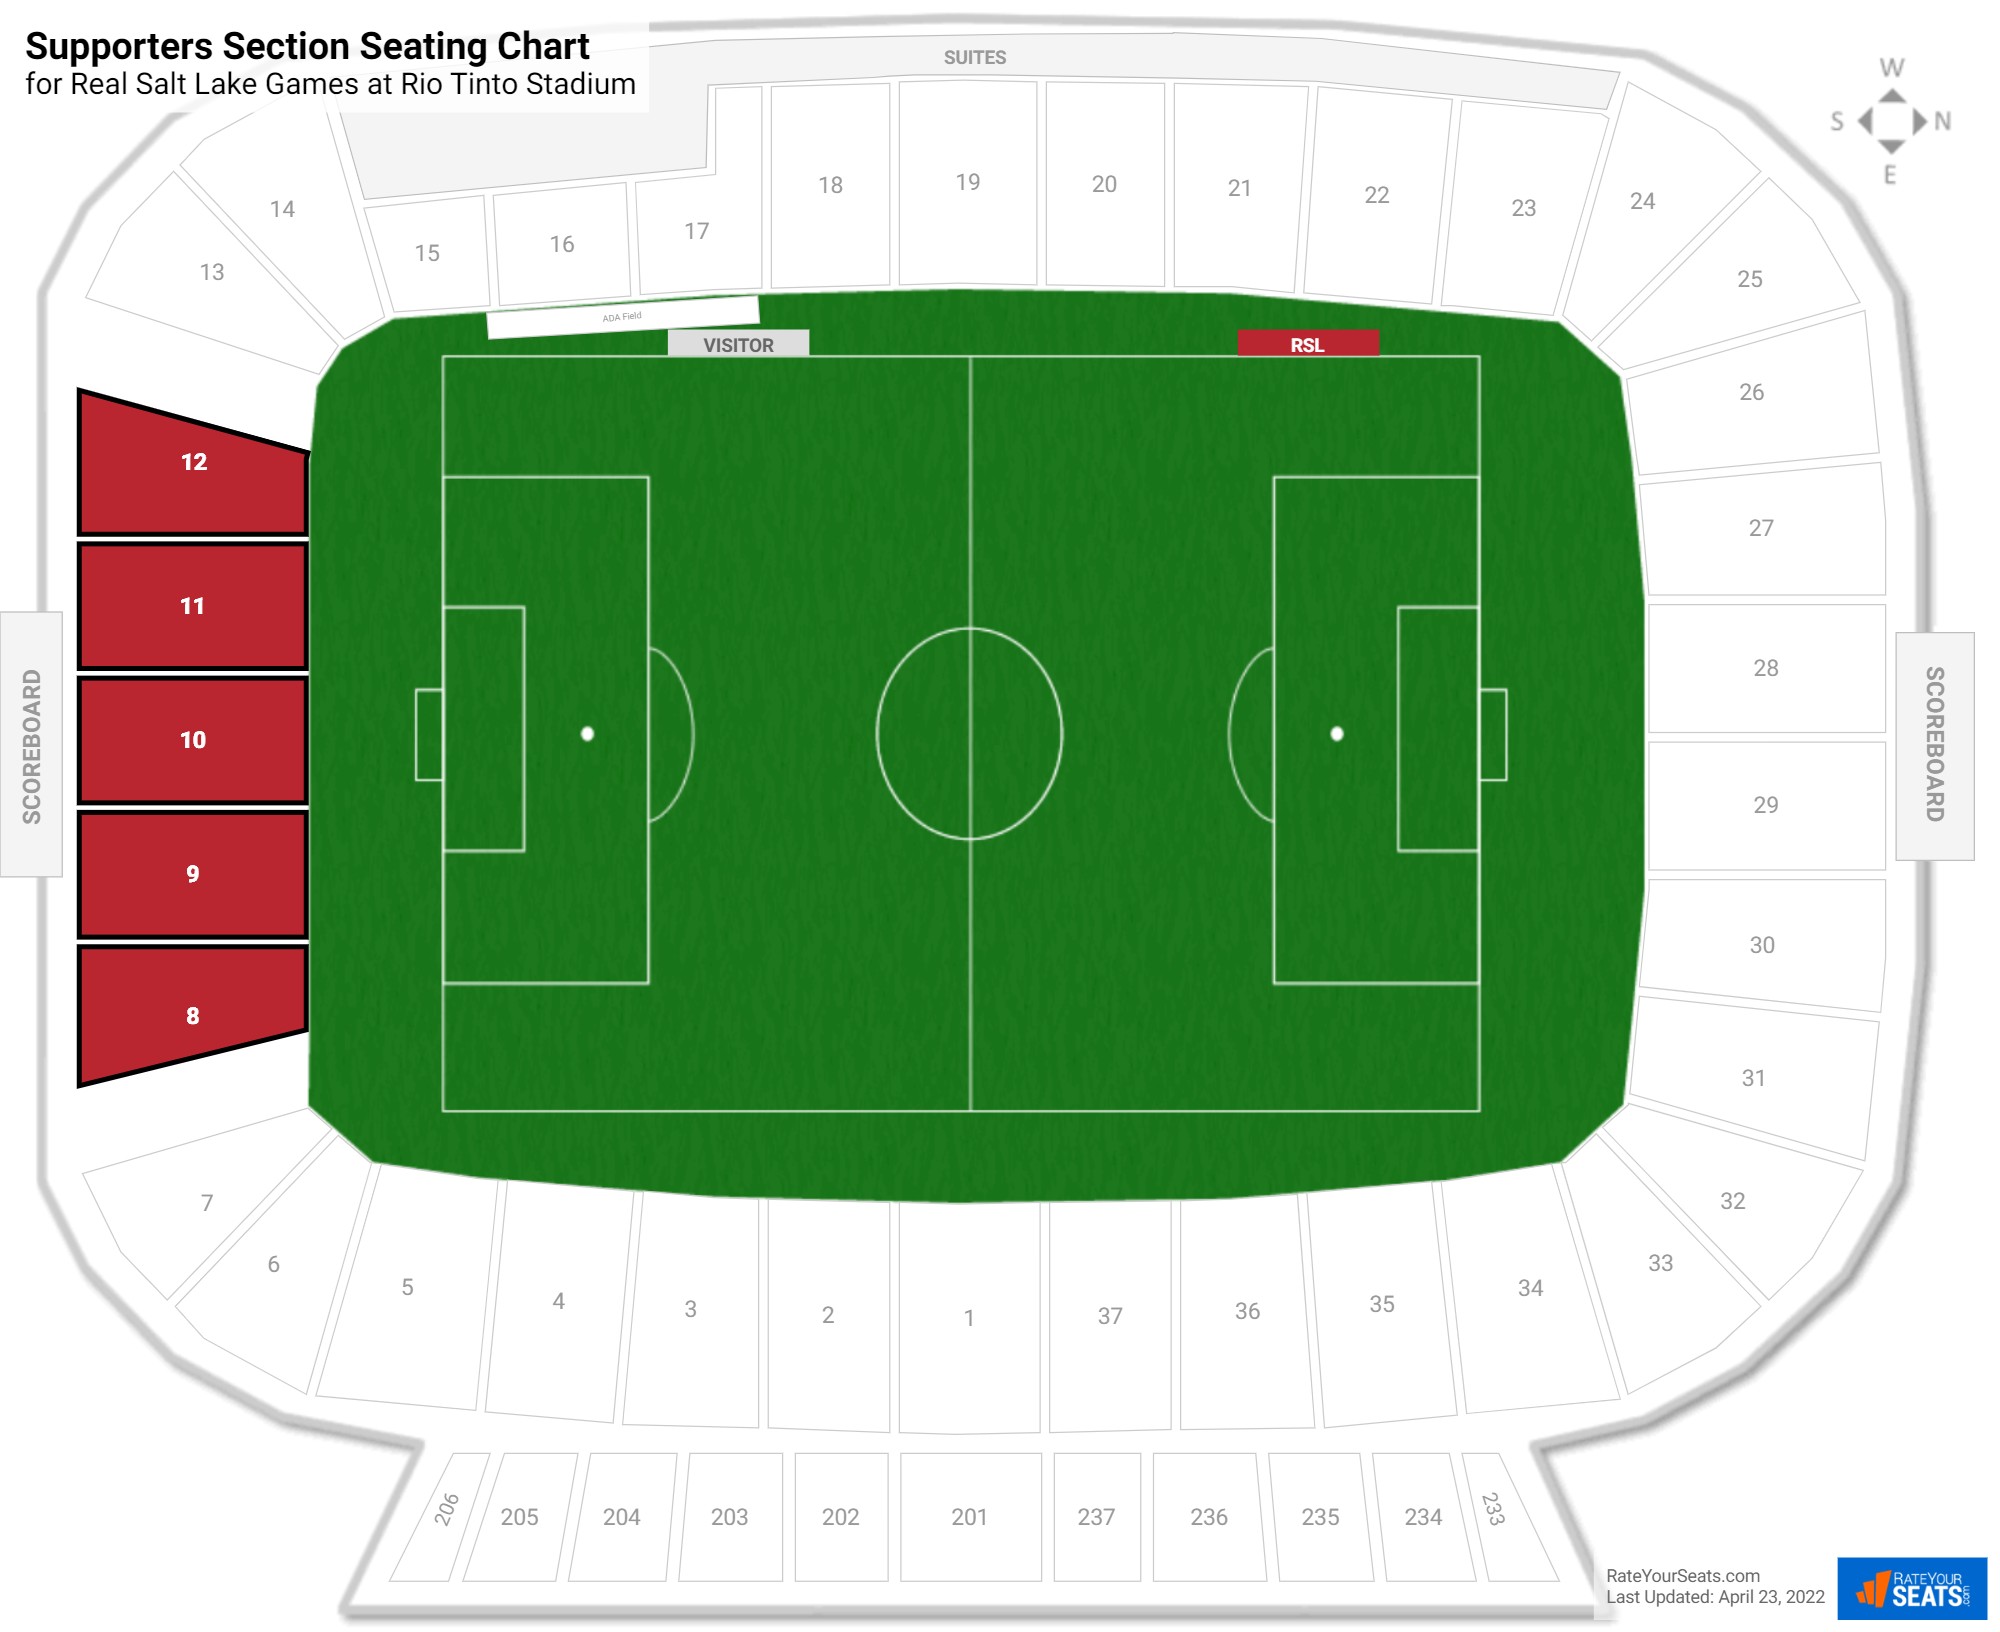 Real Salt Lake Supporters Section Seating Chart at Rio Tinto Stadium